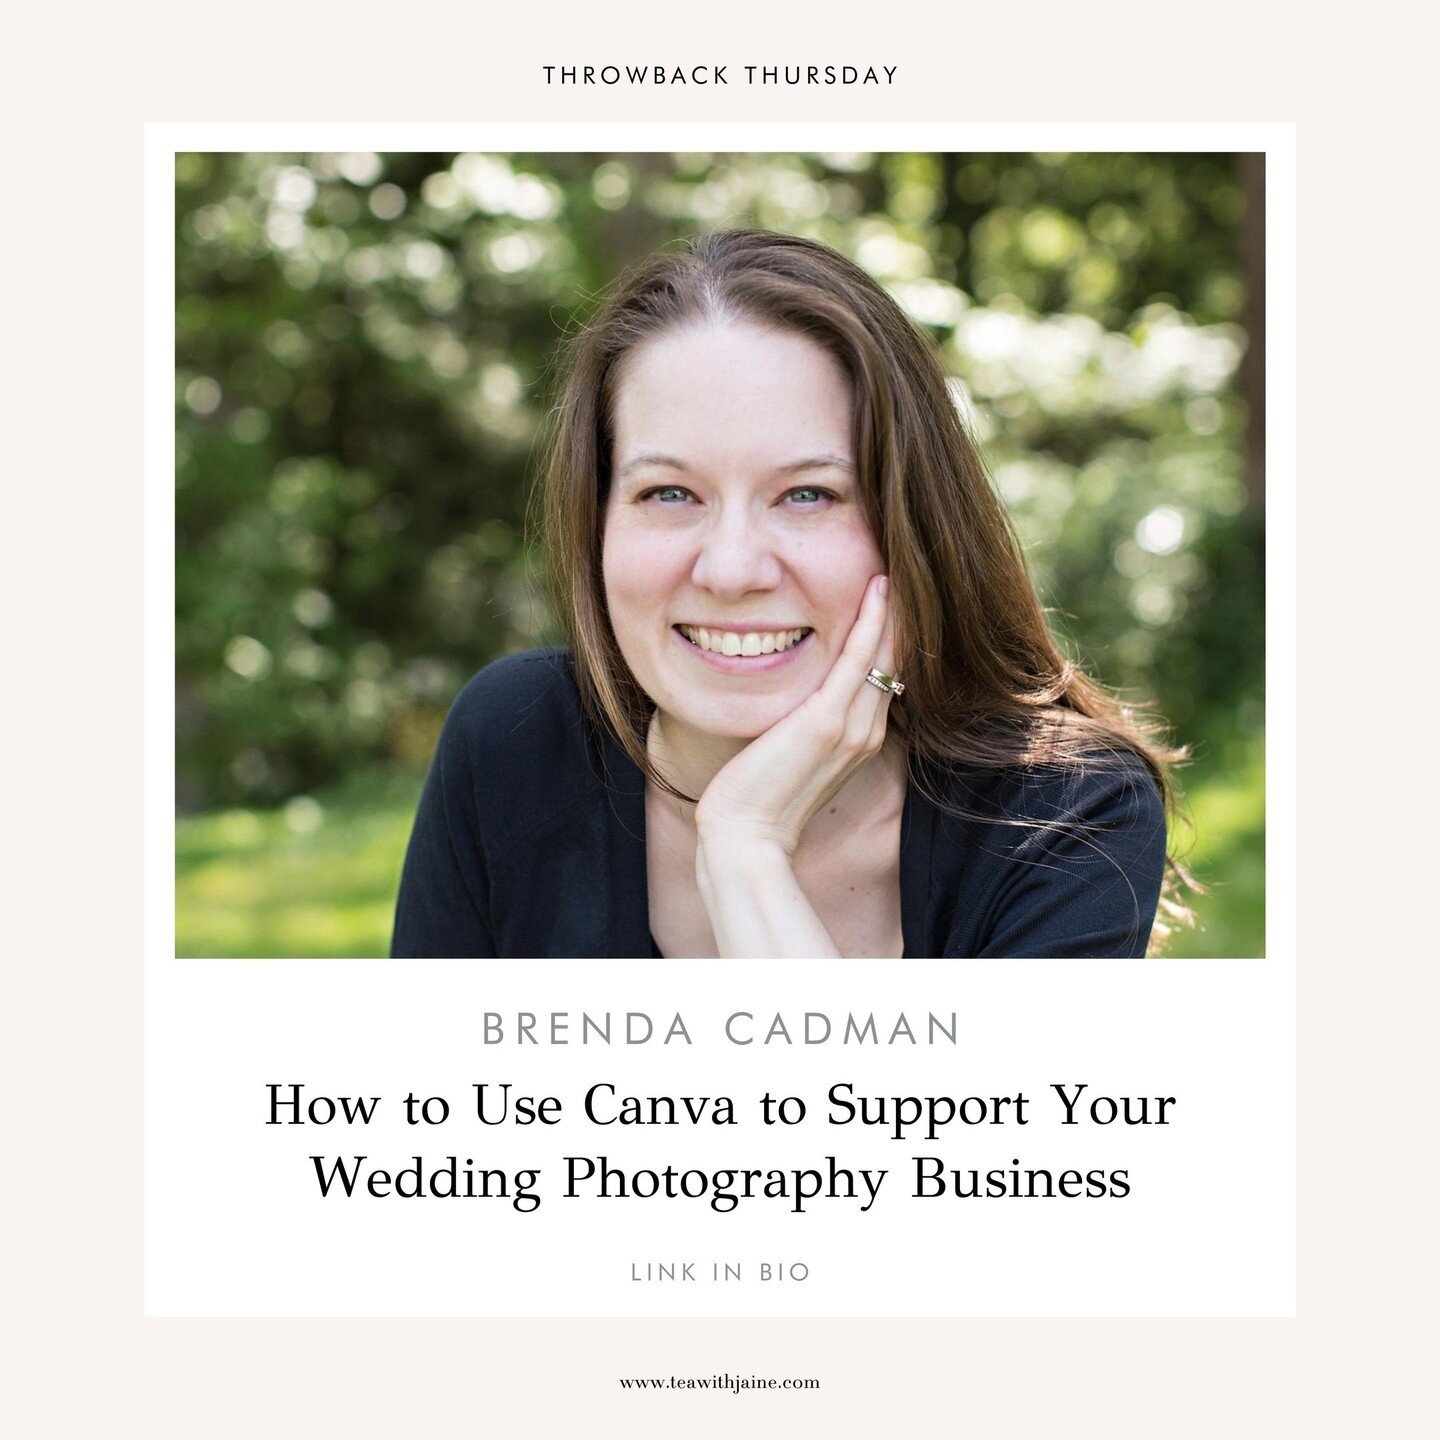 Do you want to learn how to use Canva to support your wedding photography business? 🔗 LINK IN BIO⁠
⁠
Today's #throwbackthursday ⁠is with @brendacadman who is a Canva Verified Expert. Brenda helps us get through the files and make sense of Canva once